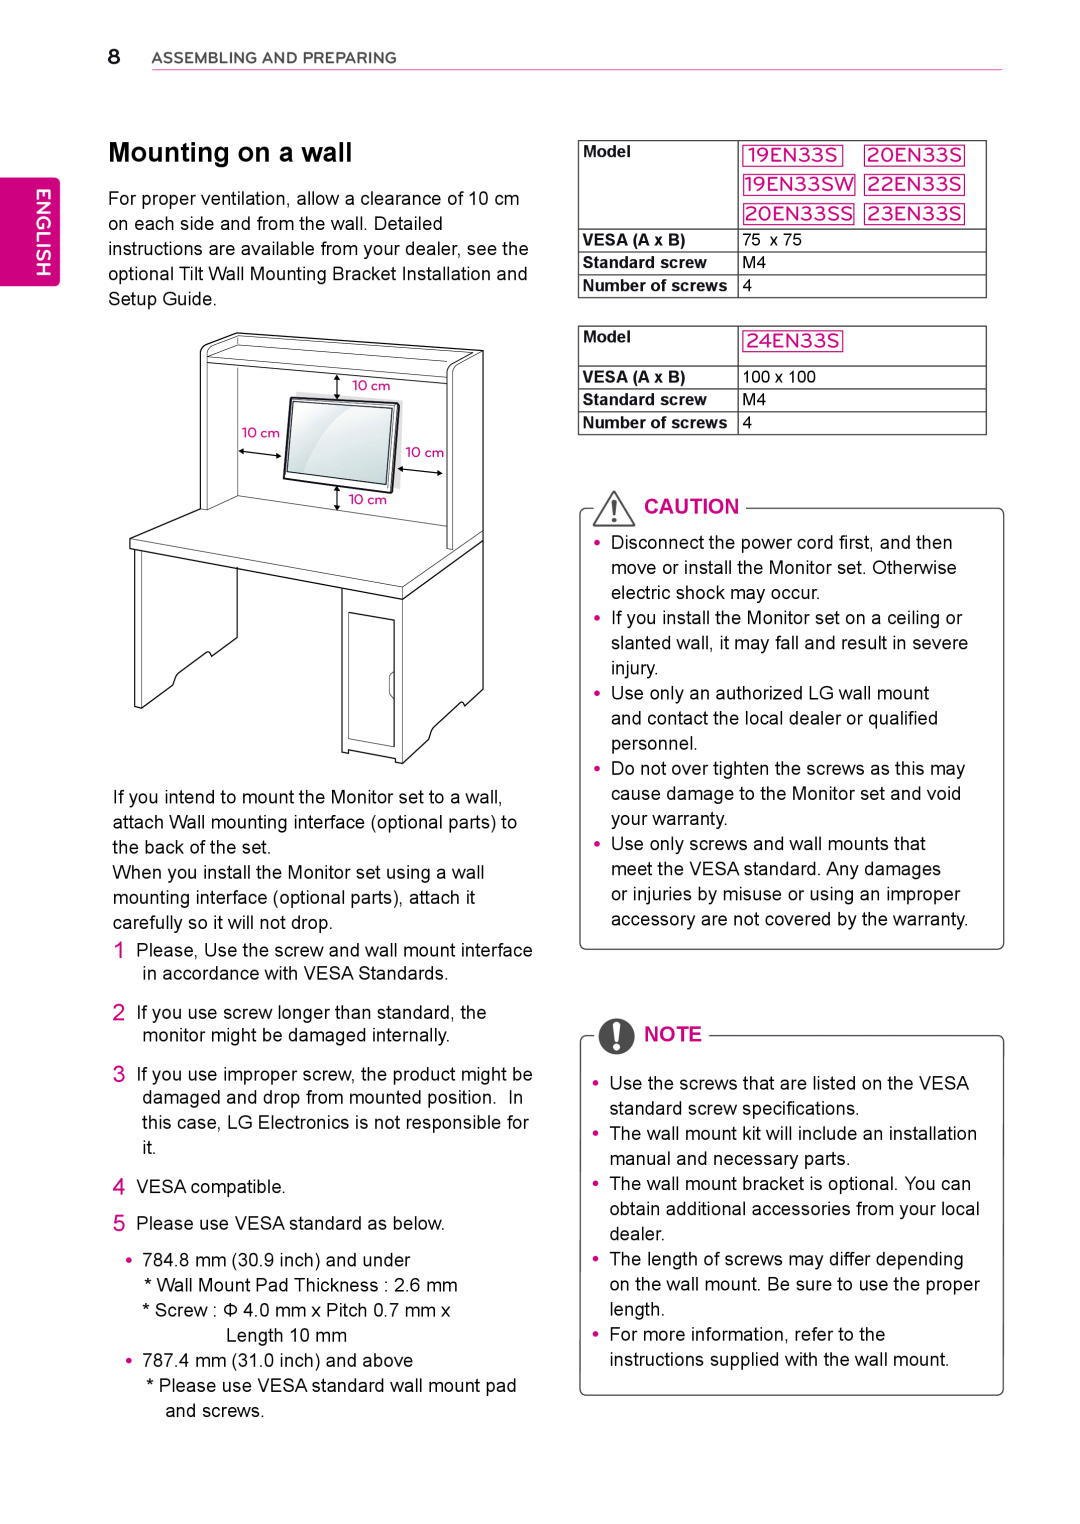 LG Electronics owner manual Mounting on a wall, English, 19EN33S 20EN33S, 19EN33SW 22EN33S, 20EN33SS 23EN33S, 24EN33S 